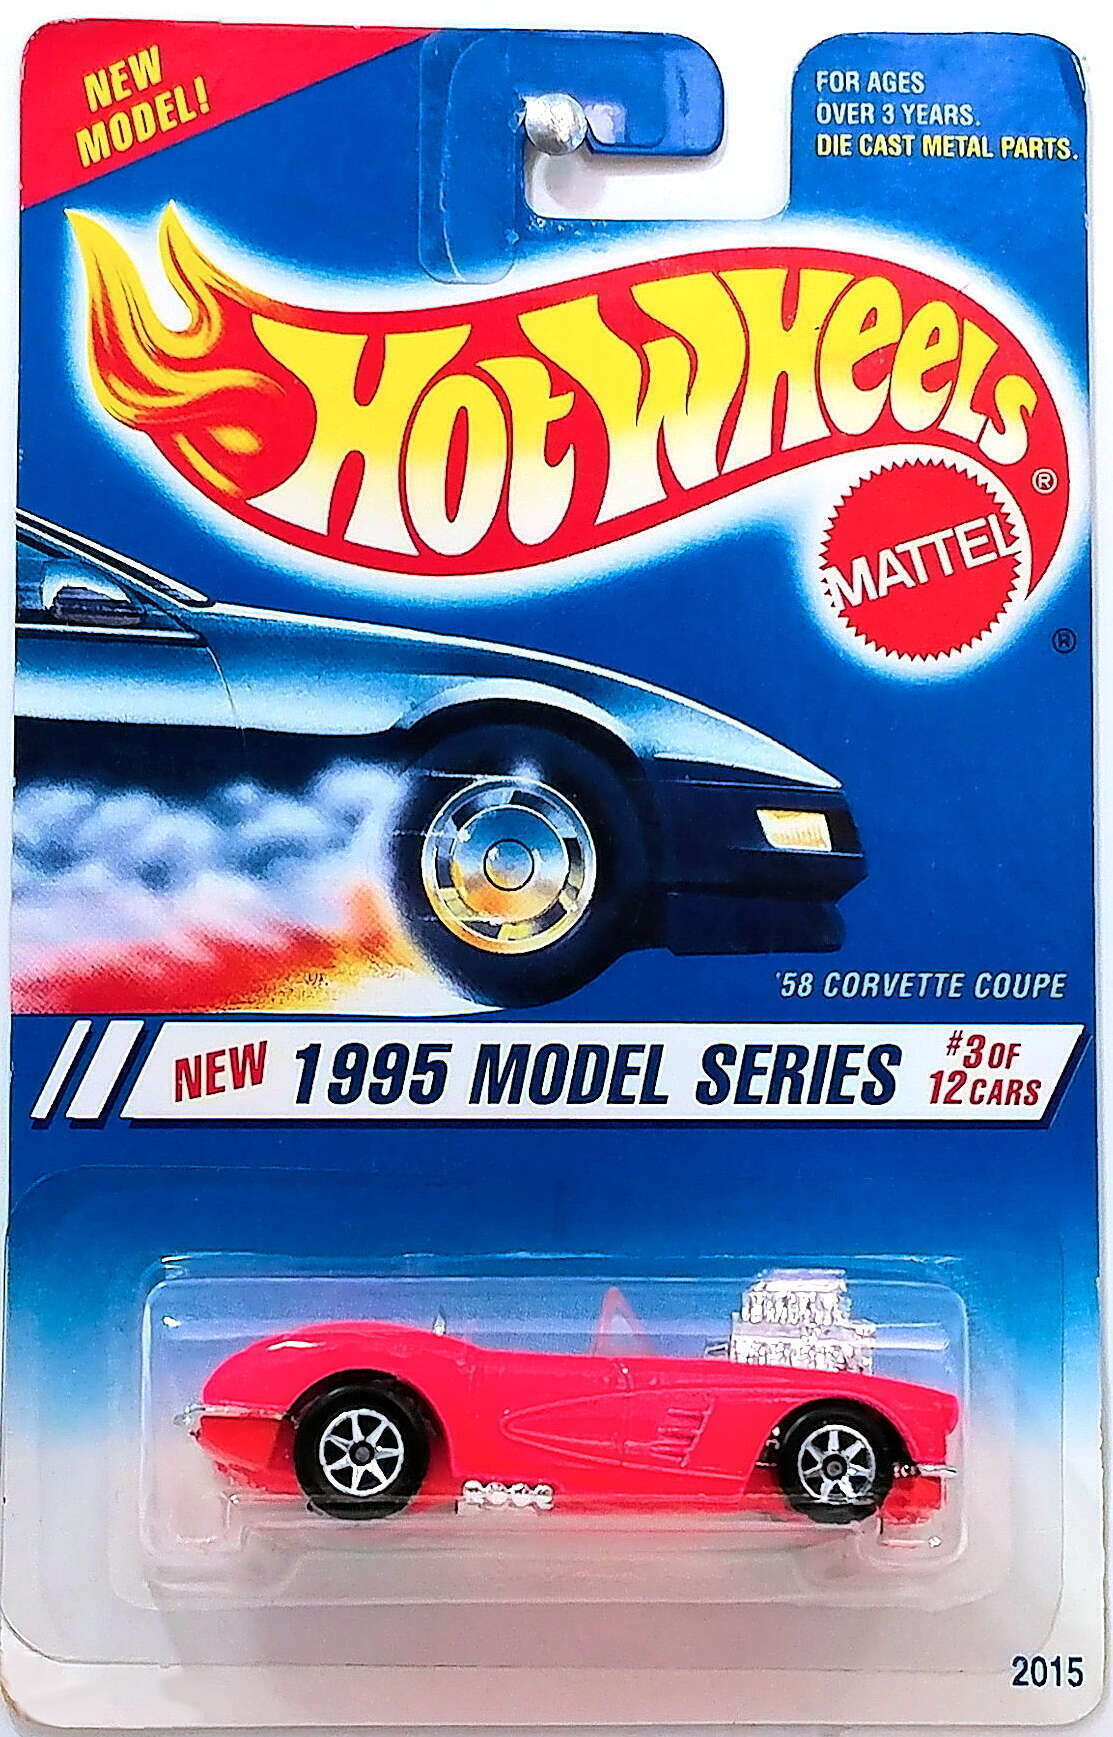 Hot Wheels 1995 - Collector # 341 - Model Series 3/12 - '58 Corvette Coupe - Flourescent Pink - 7 Spokes - Chrome Motor, Interior, Bumpers & Grille - USA